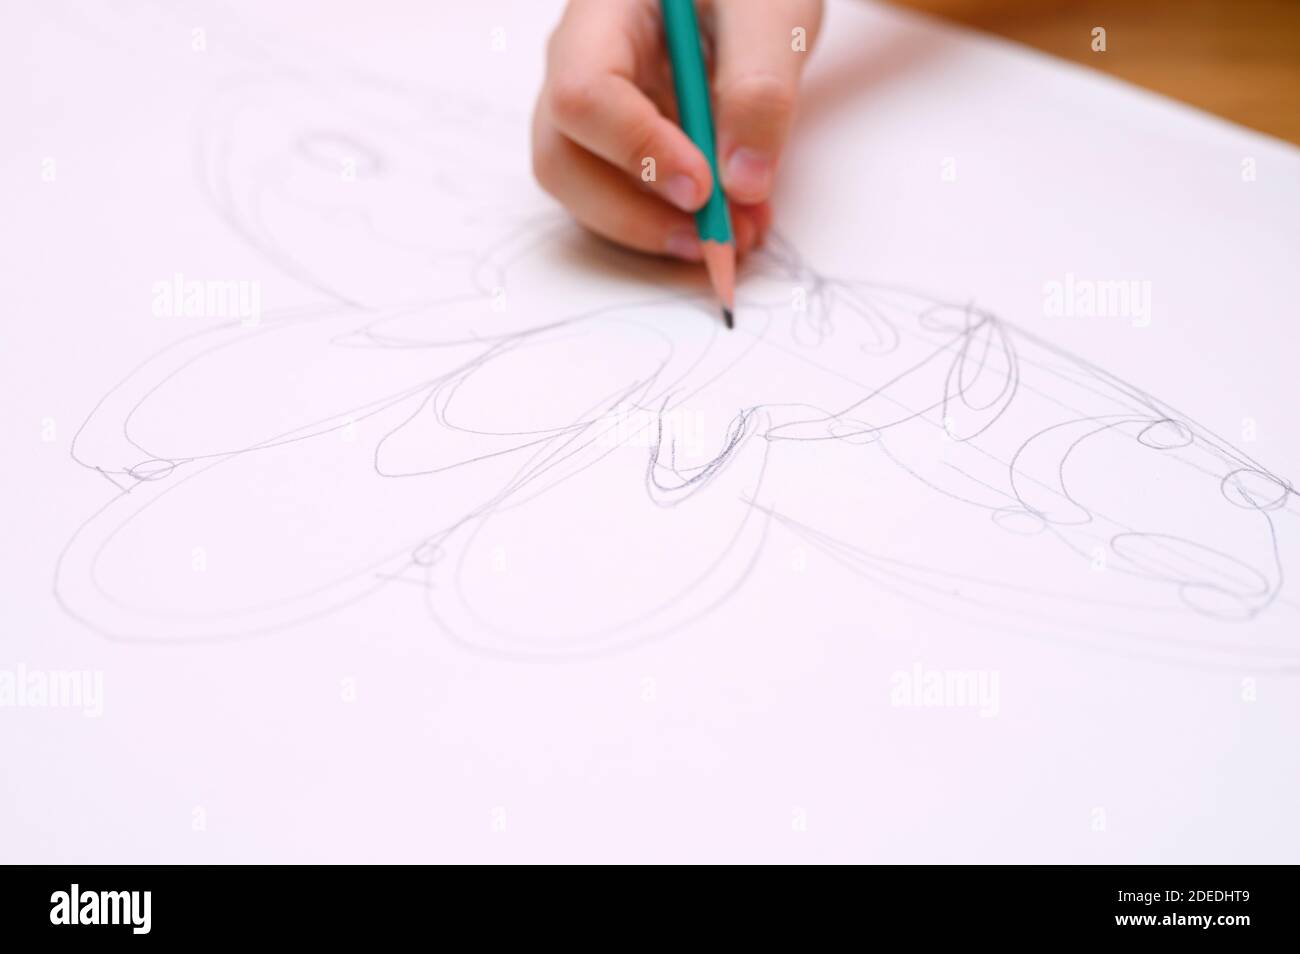 kids hobby. child hand draws sketch with a pencil on white paper Stock Photo